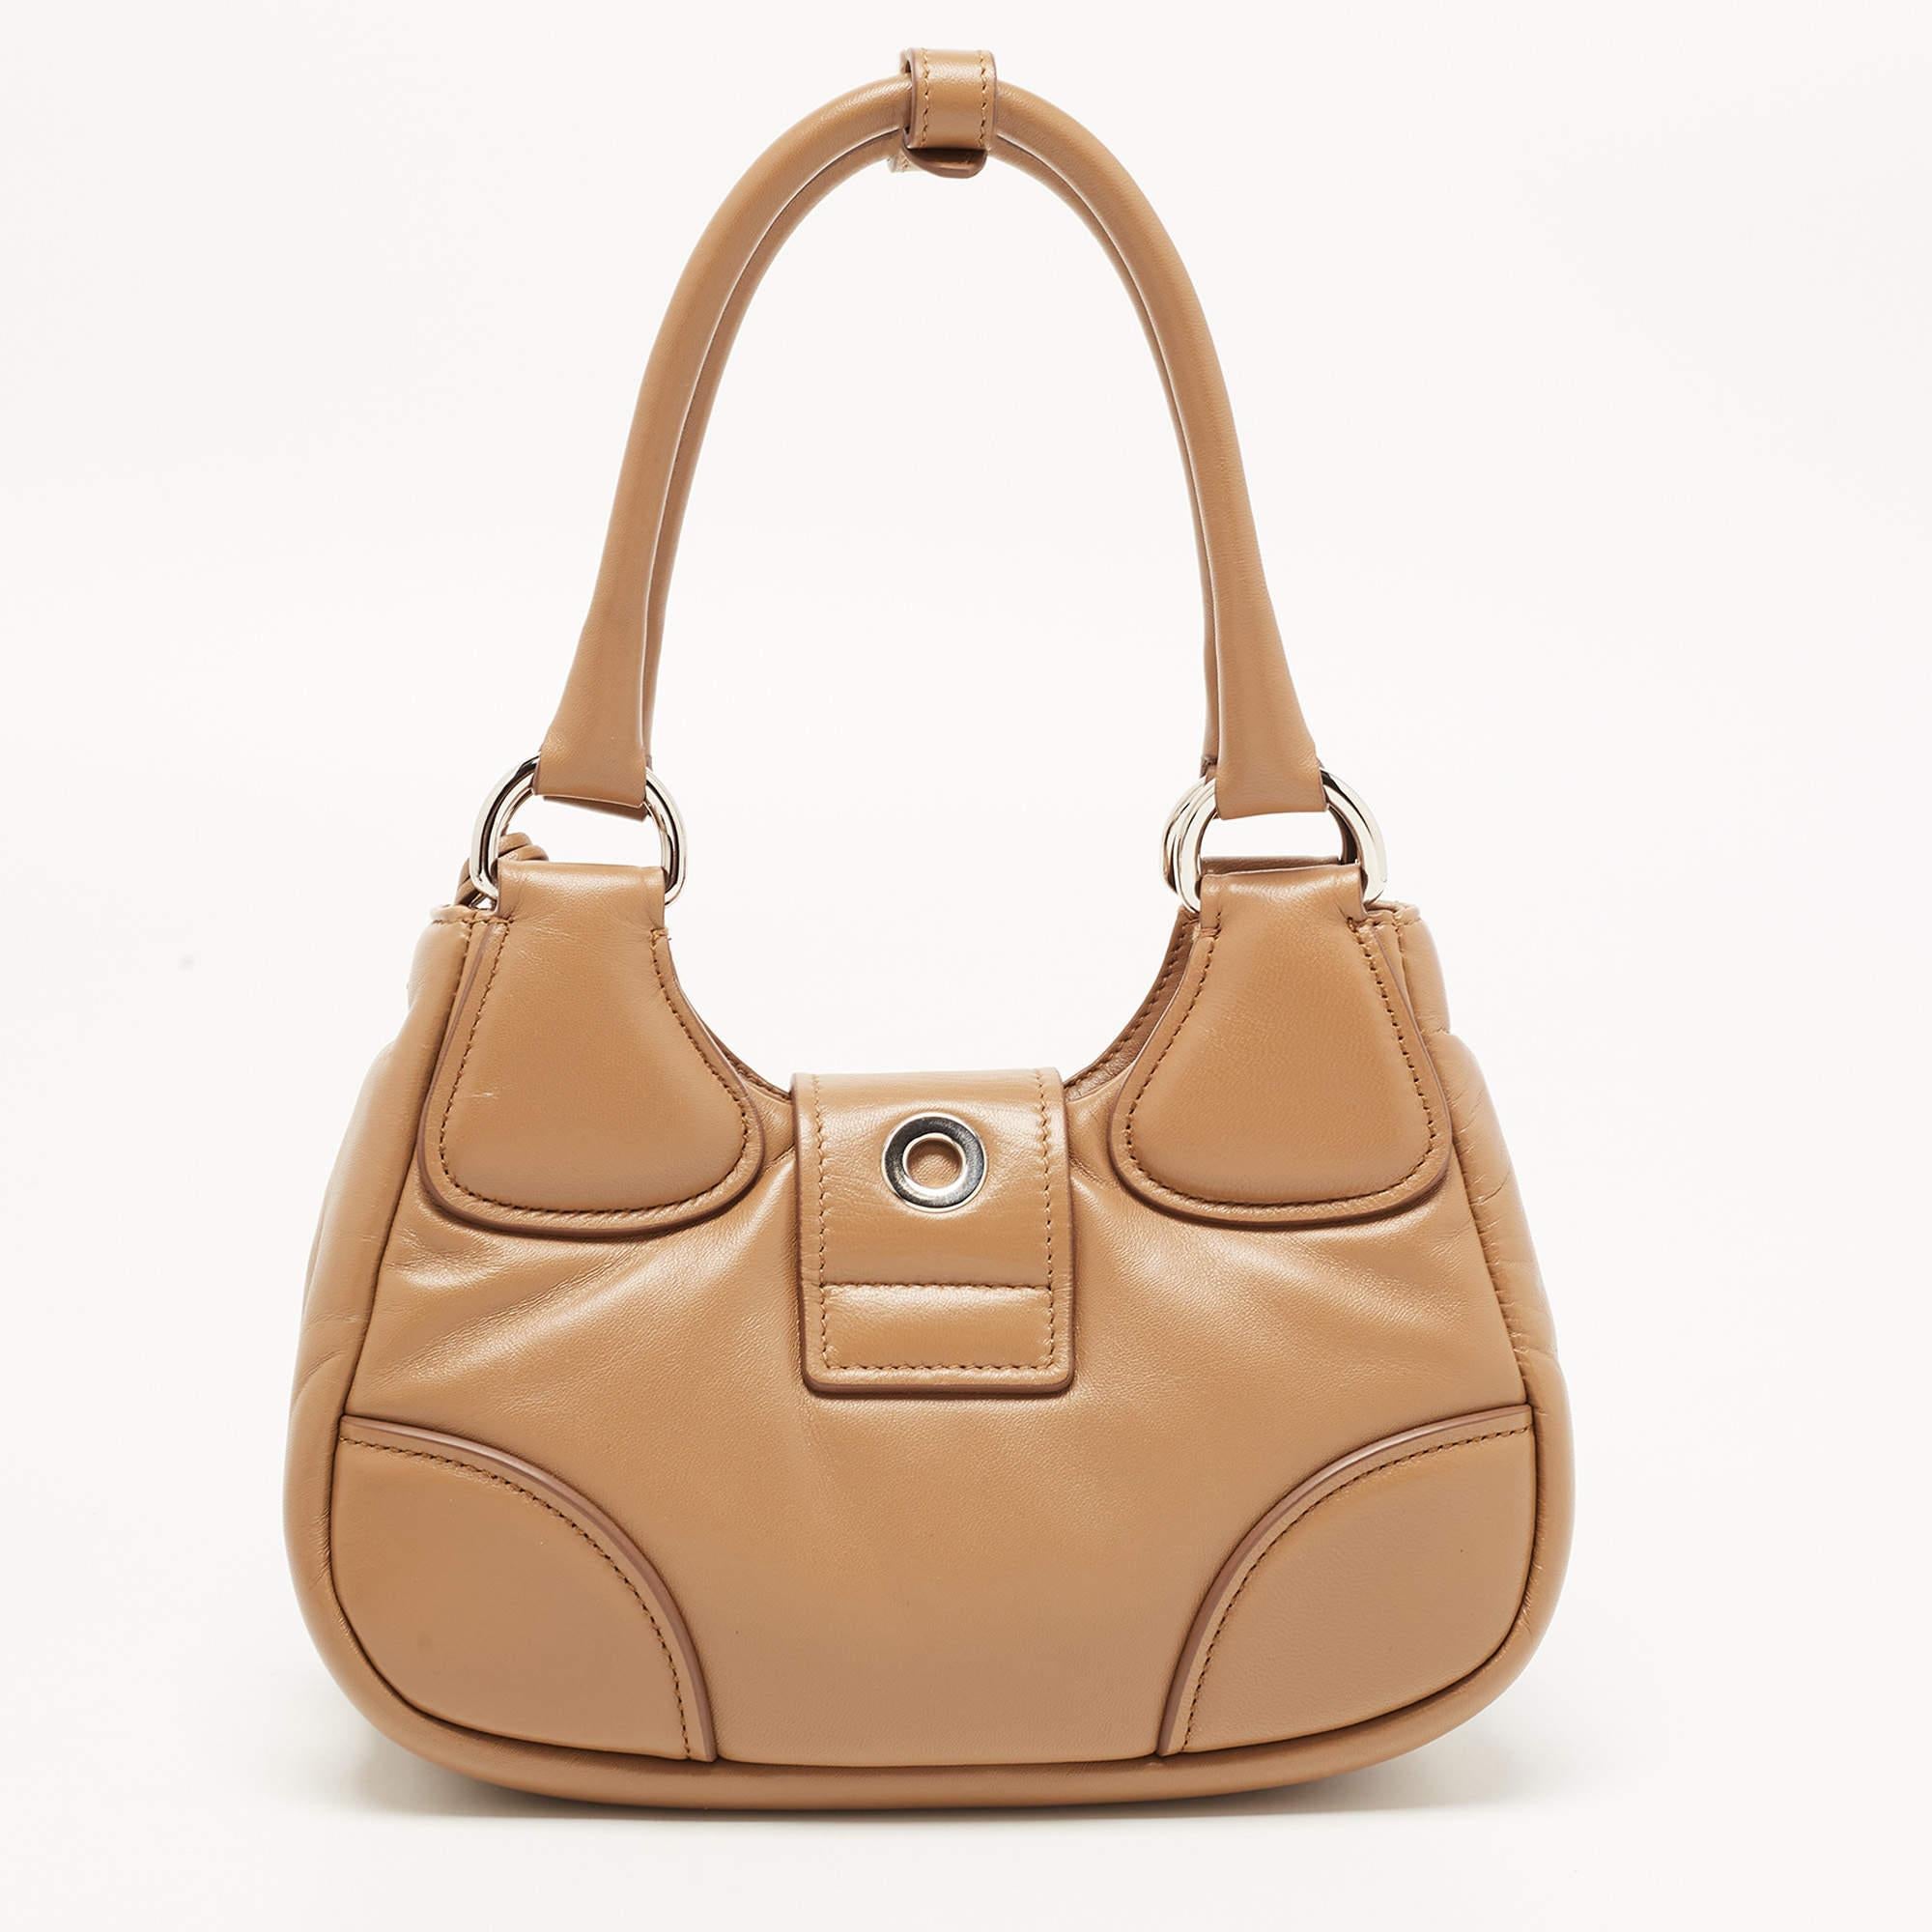 The Prada Re-edition 2002 bag is a luxurious accessory that exudes elegance and sophistication. Crafted from high-quality leather, it features a padded design and a rich brown color, showcasing a timeless aesthetic. With its re-edition status, this